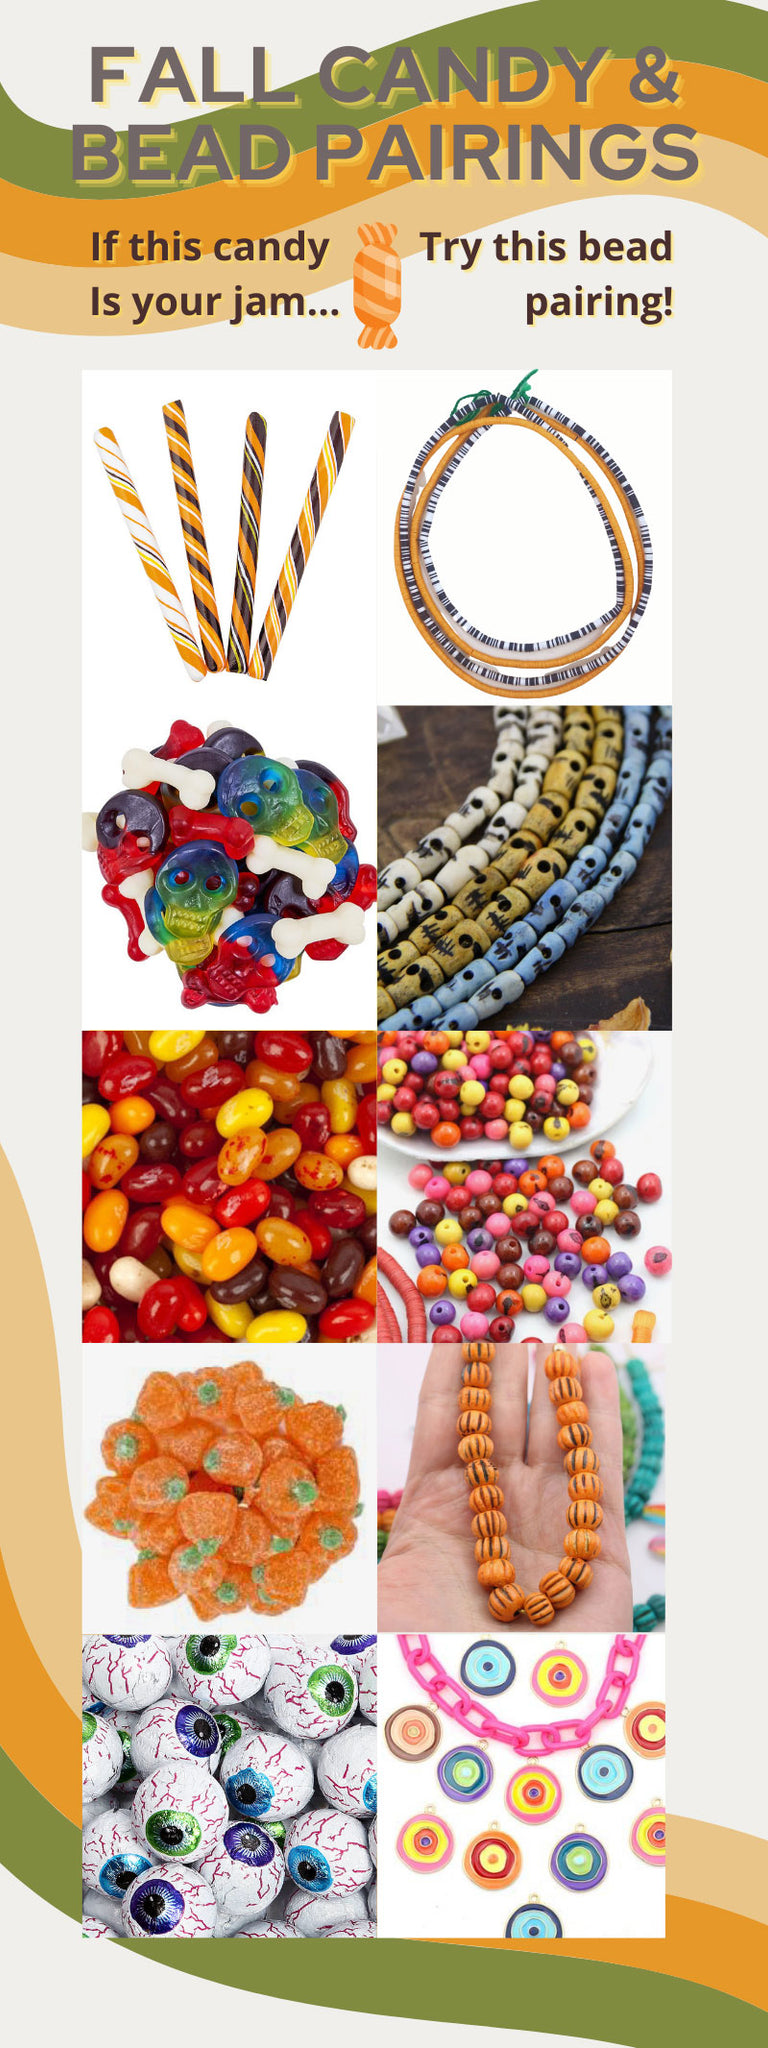 Fall Candy to Bead Pairings, from WomanShopsWorld